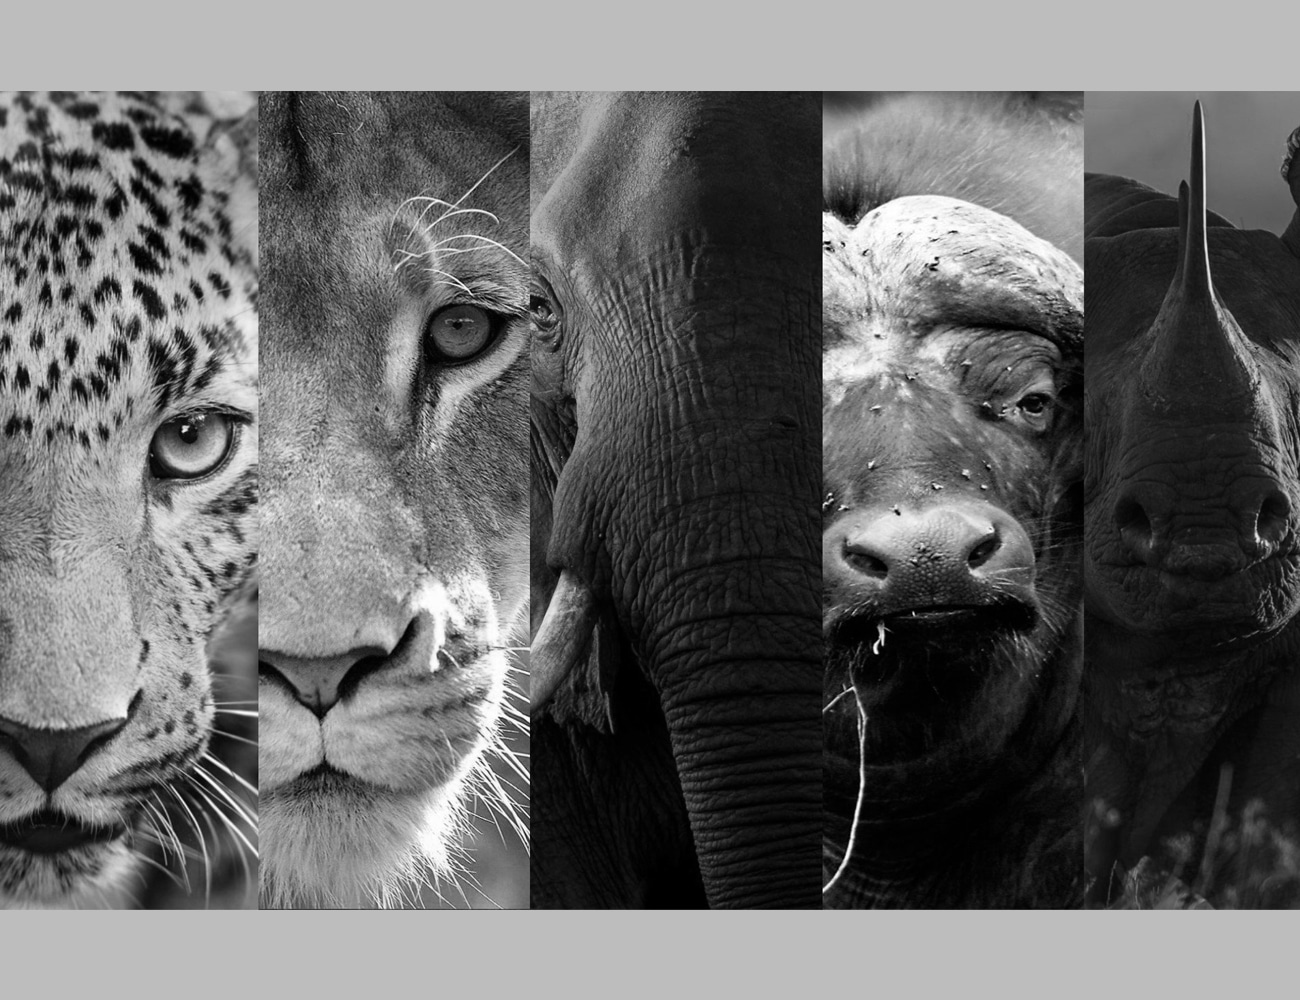 The Big Five of East Africa